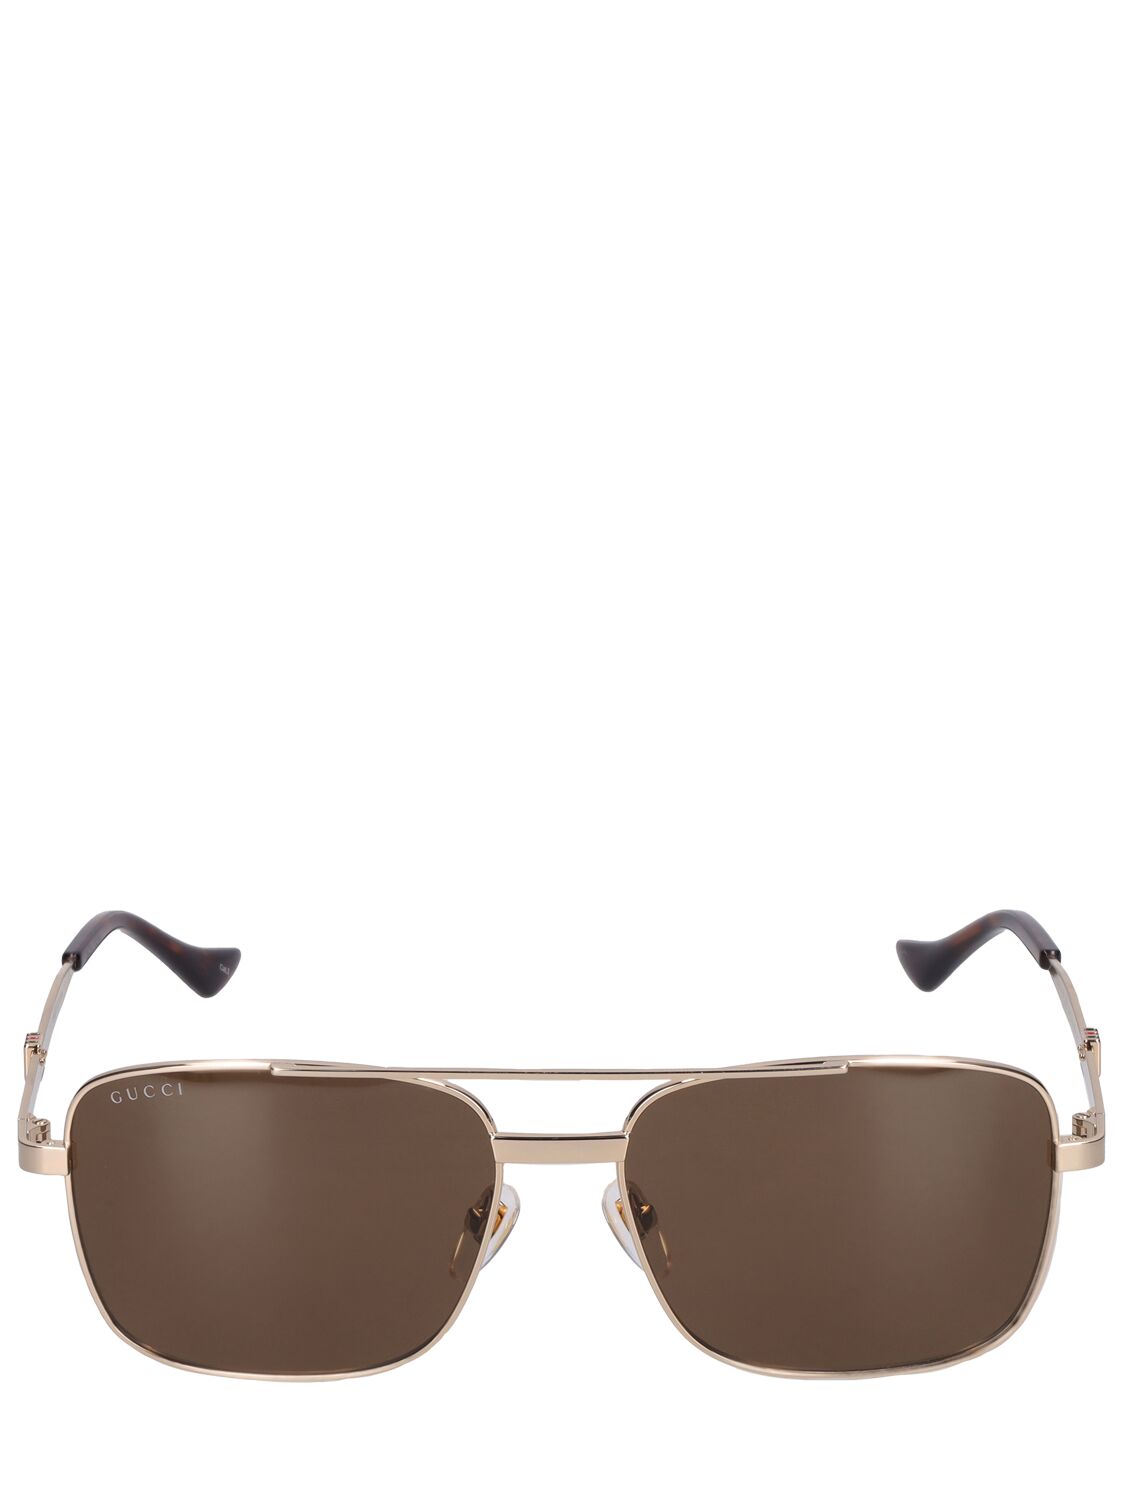 Gucci Gg1441s Metal Sunglasses In Gold,brown